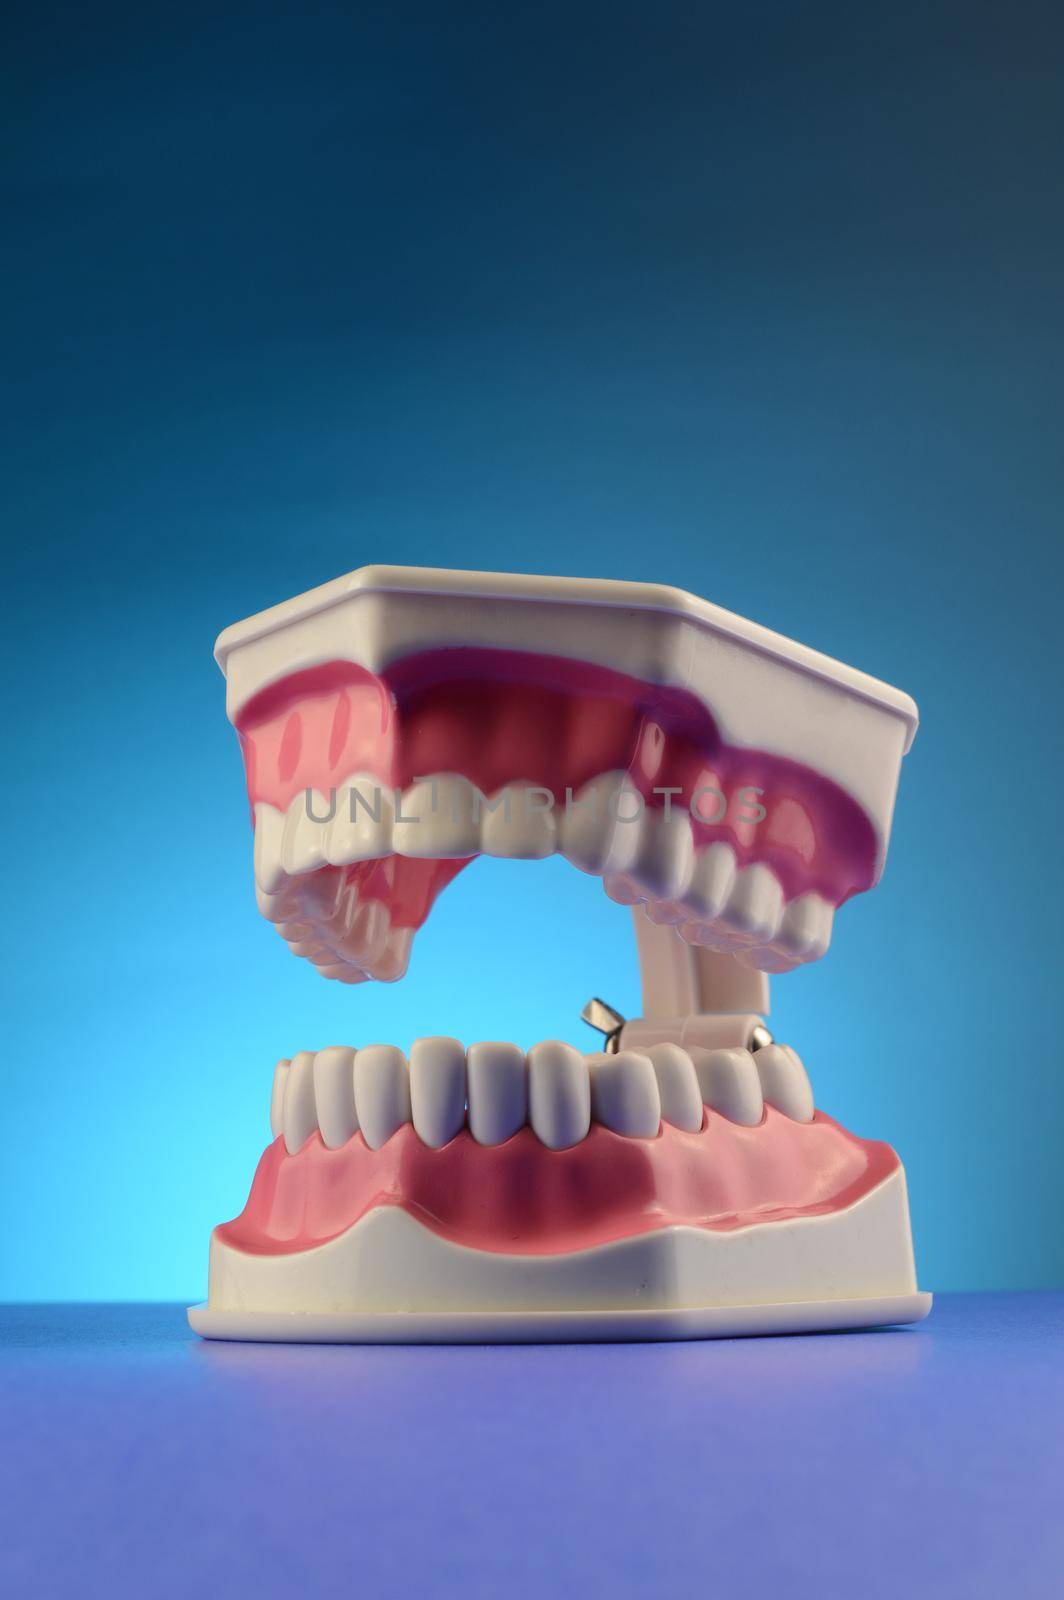 A set of teeth on display for dental purposes with copyspace for your edits.